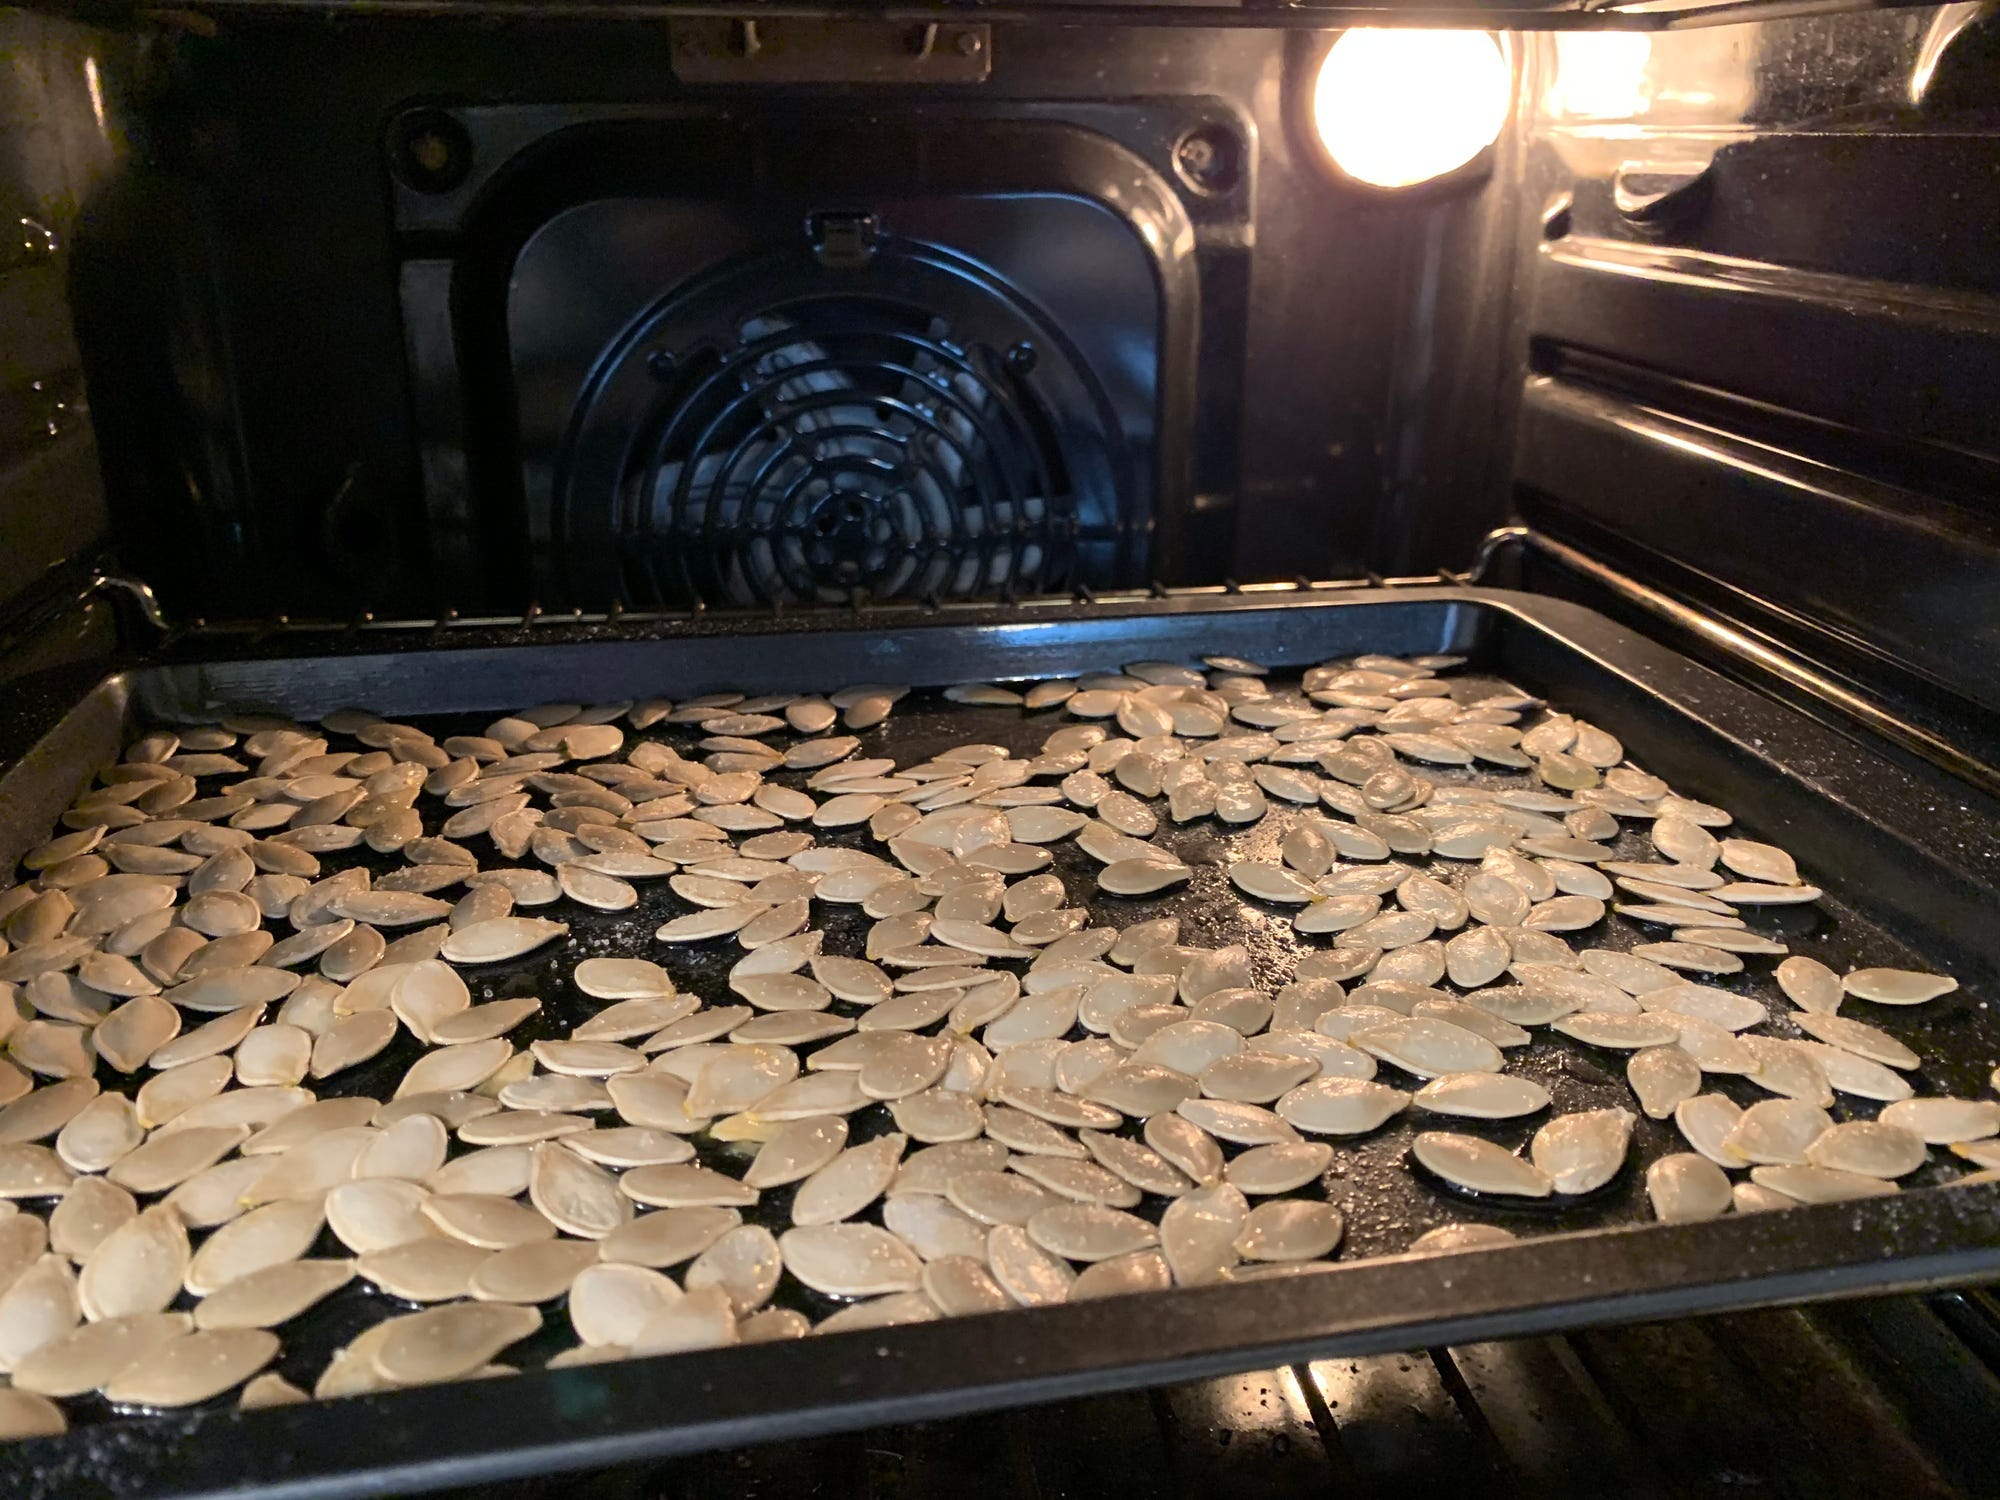 A tray of pumpkin seeds in the oven.